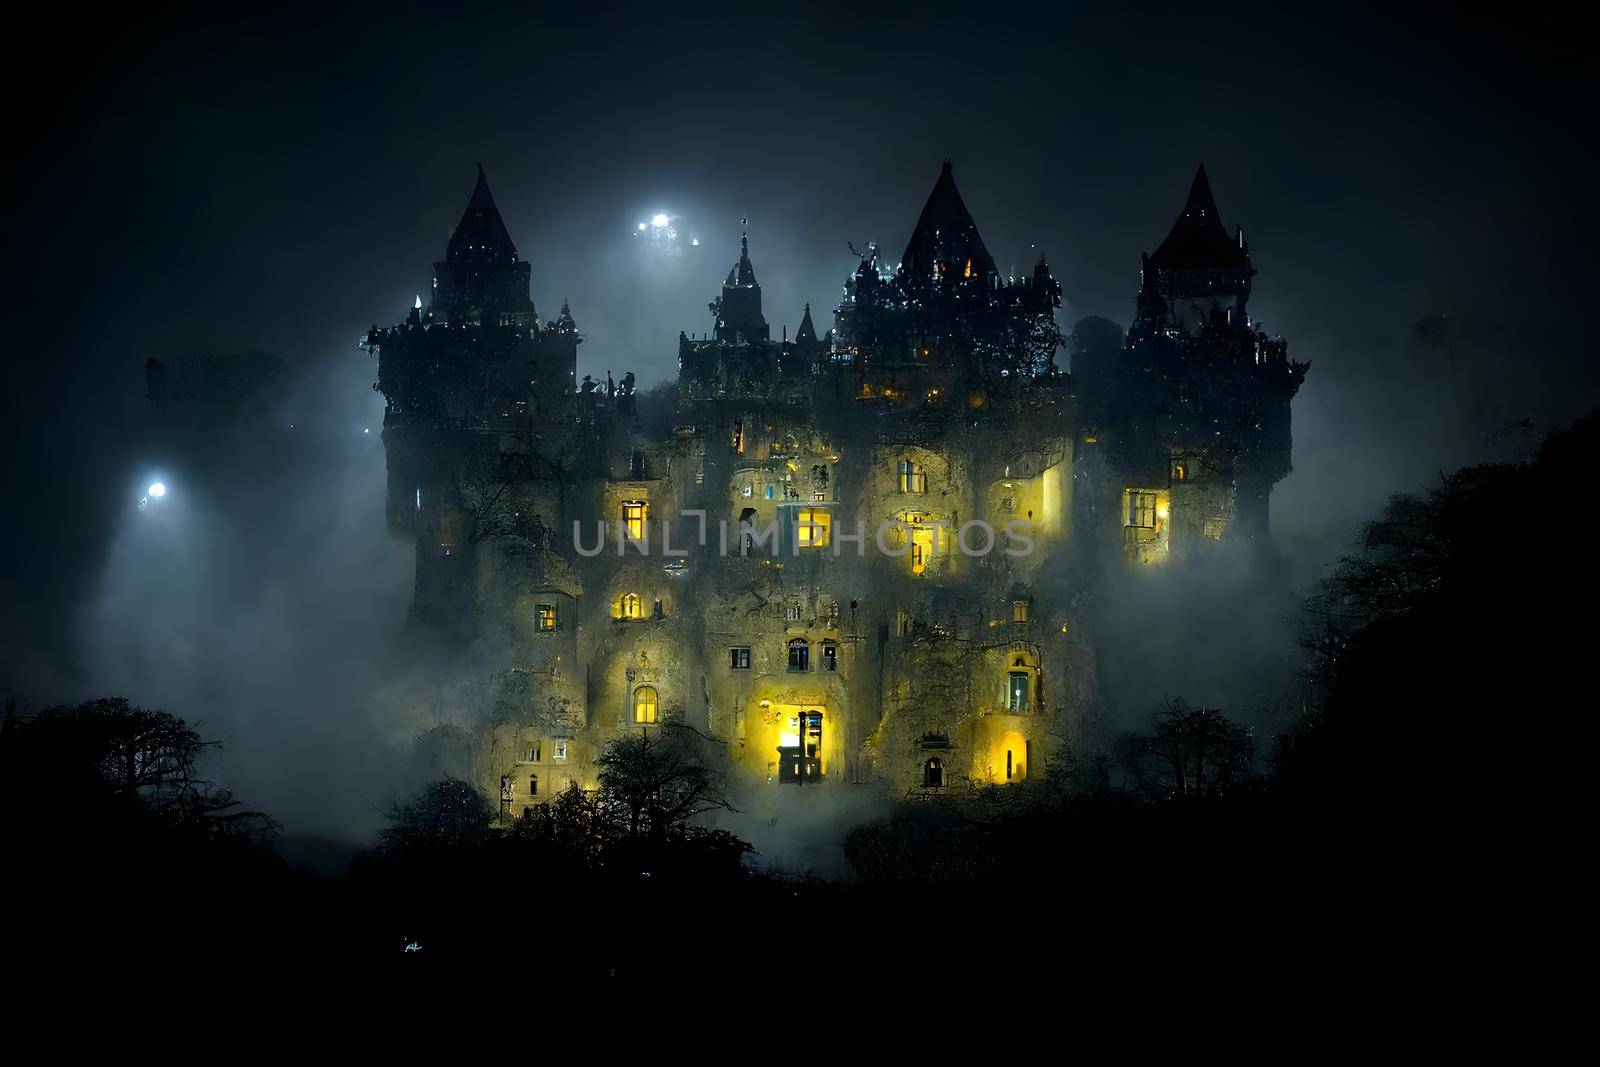 large haunted castle with many illuminated windows at spooky misty dark halloween night, neural network generated art. Digitally generated image. Not based on any actual scene or pattern.